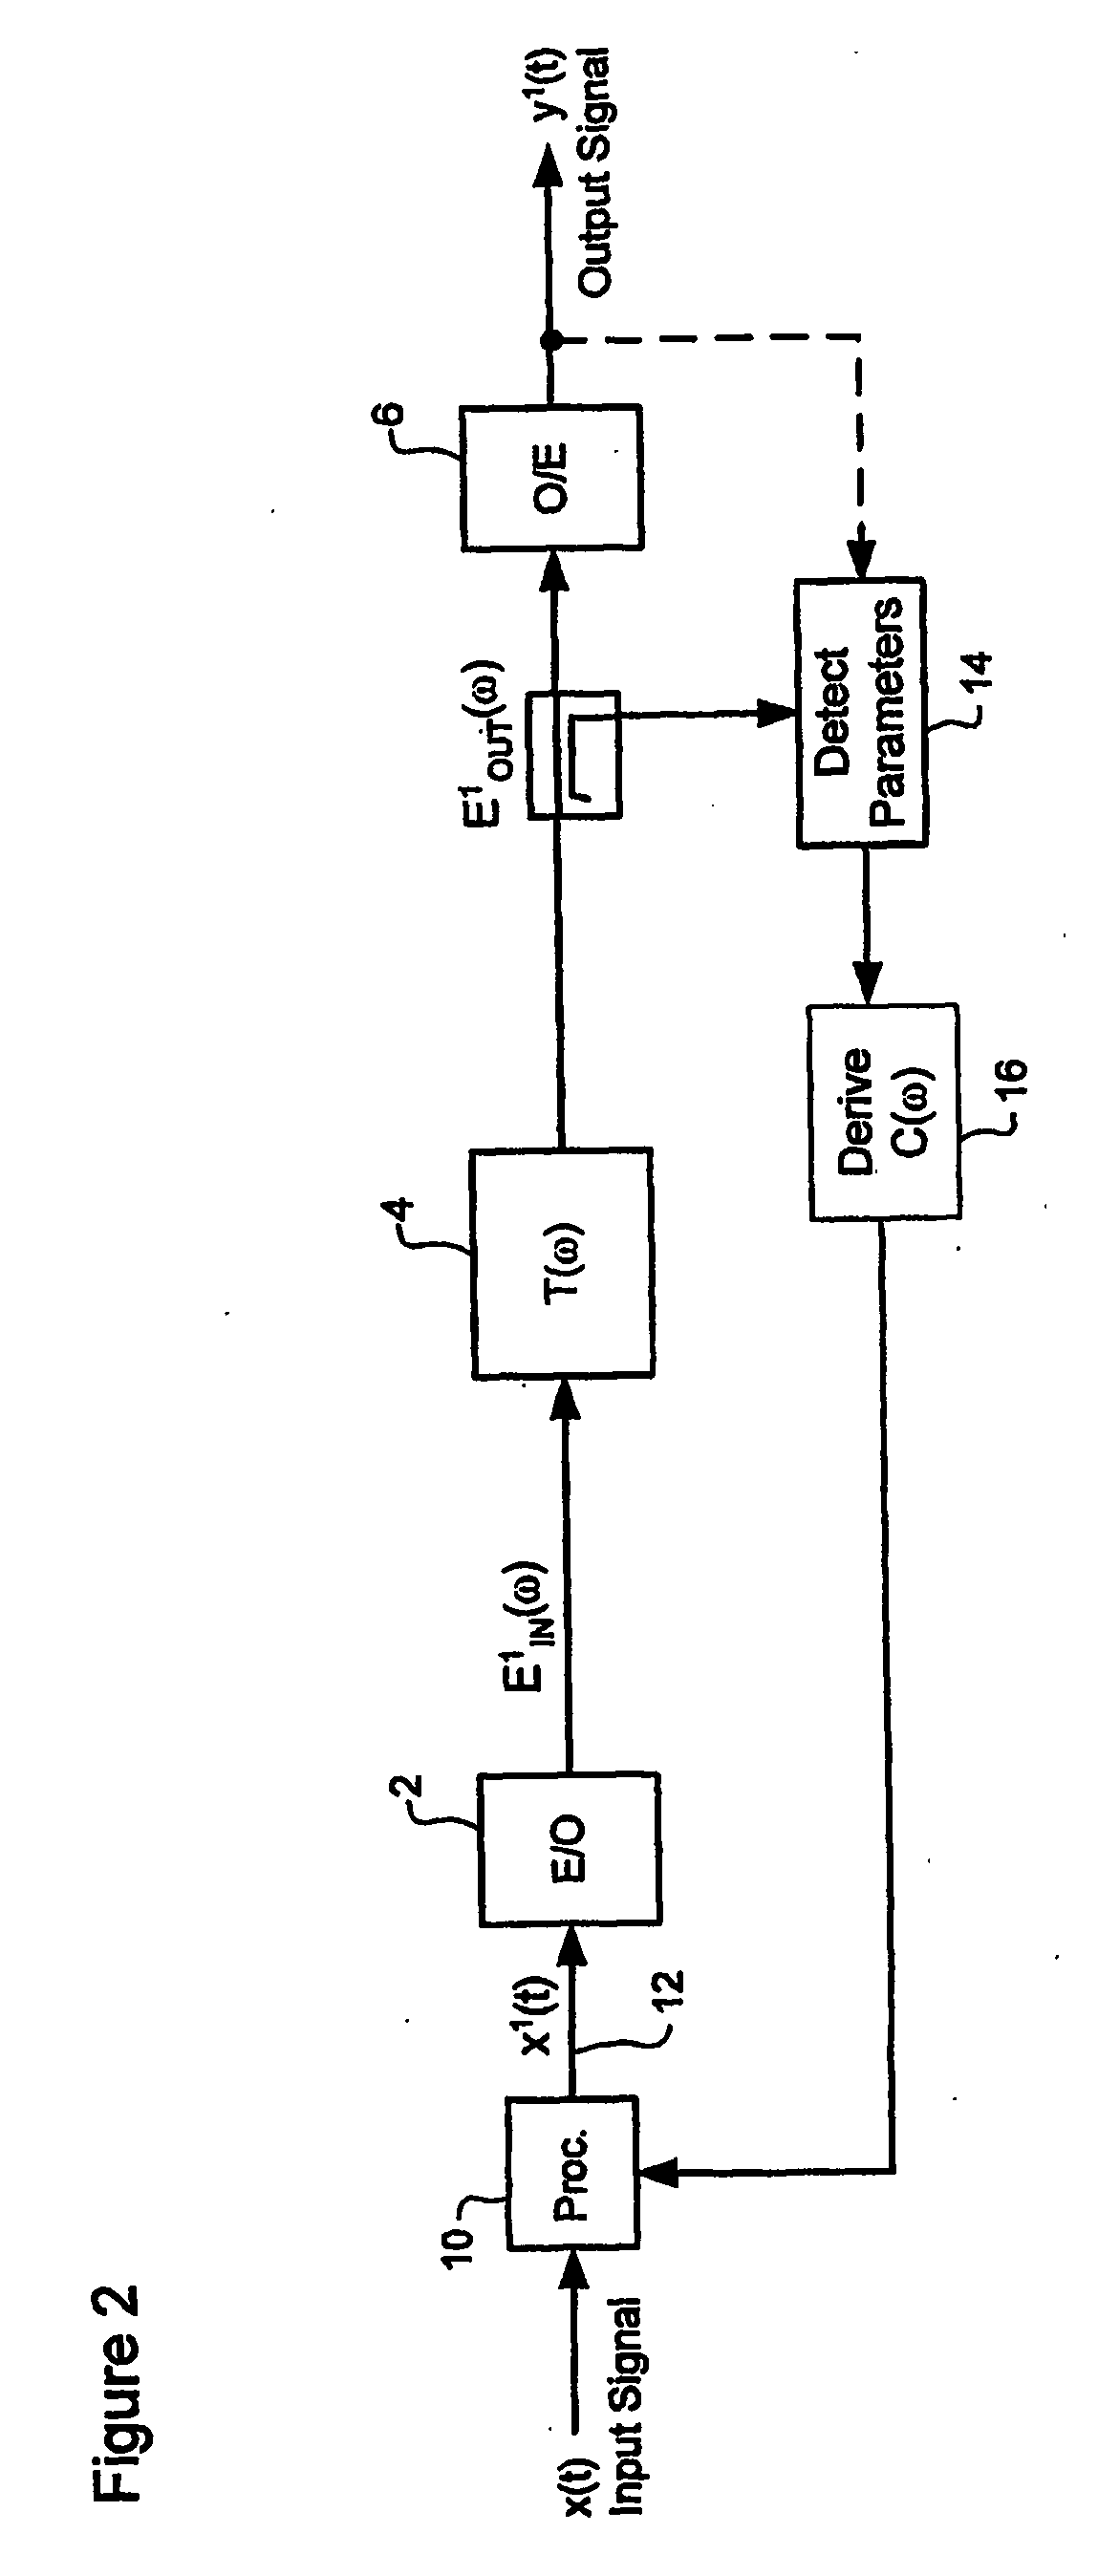 Optical dispersion compesnation in the electrical domain in an optical communications system